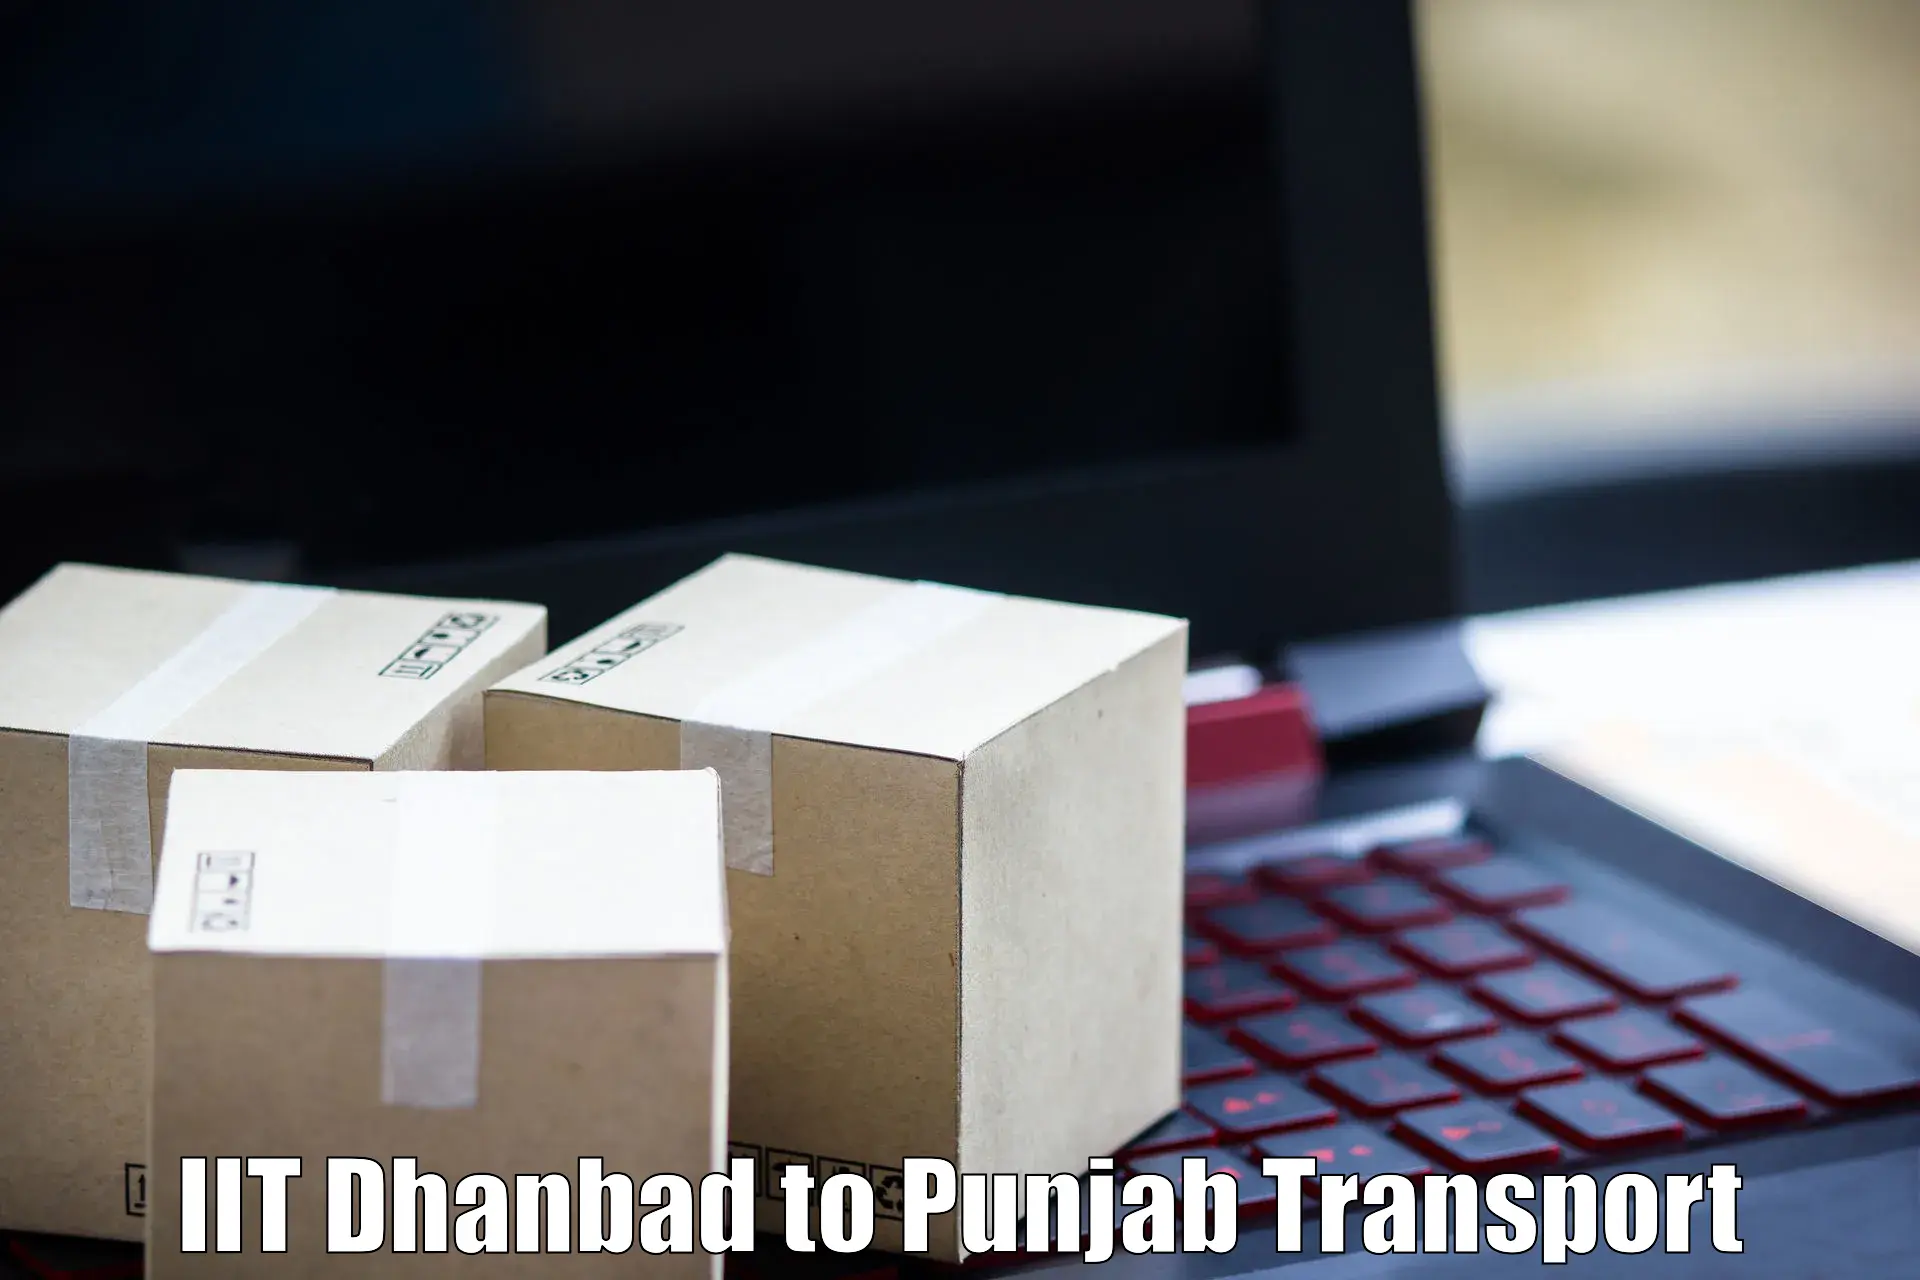 Nearby transport service IIT Dhanbad to Bagha Purana